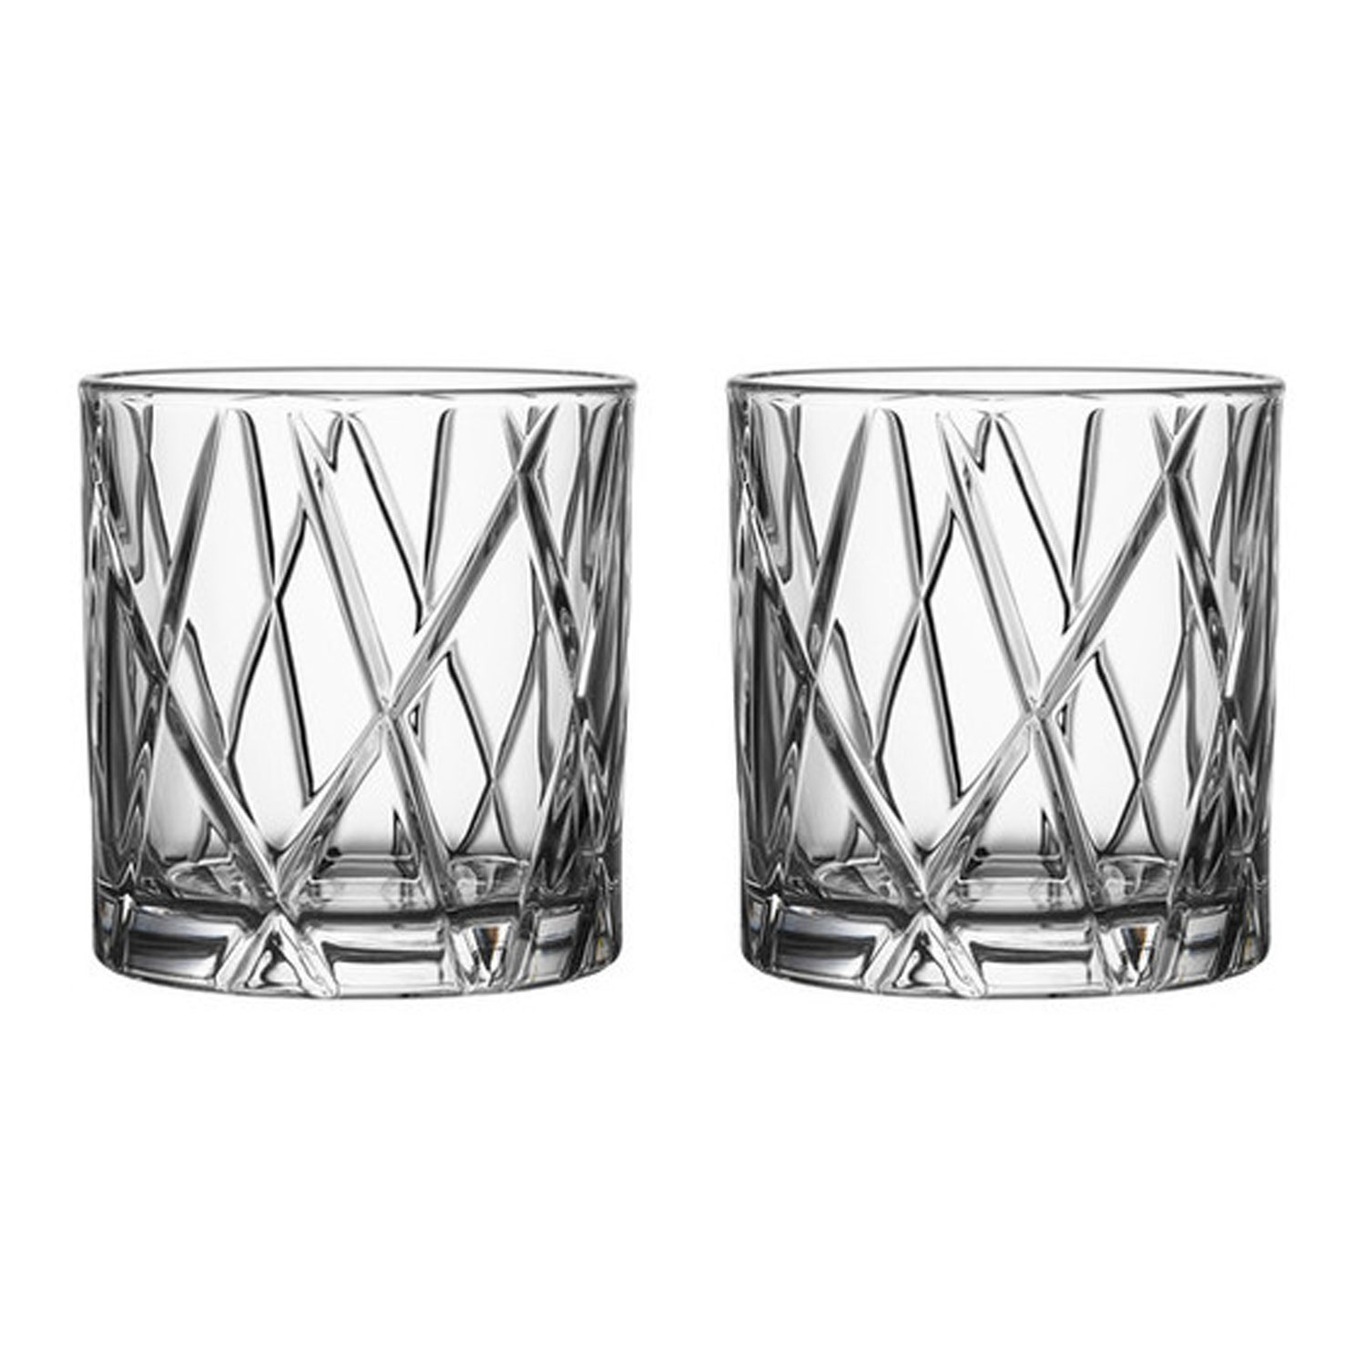 City Whiskyglas DOF 34 cl, 2-Pack